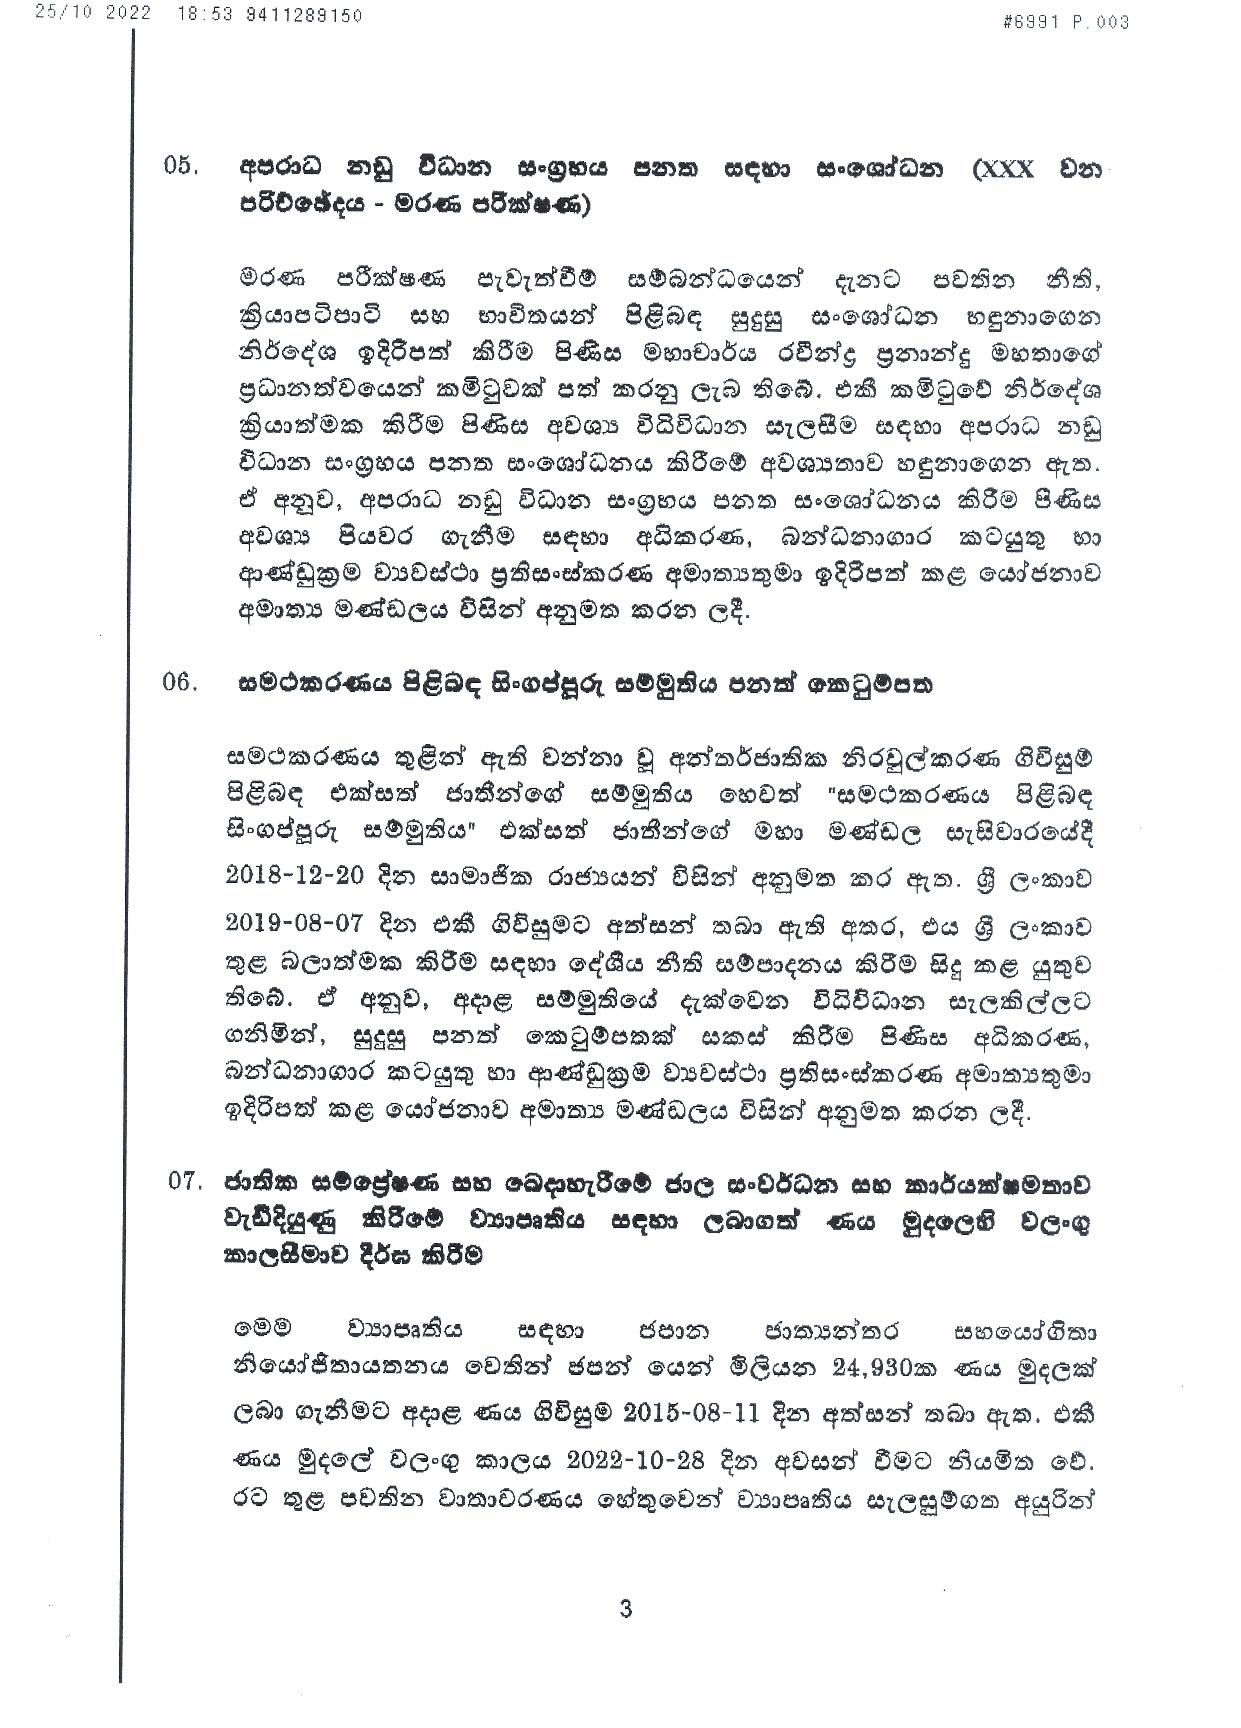 Cabinet Decision on 25.10.2022 page 003